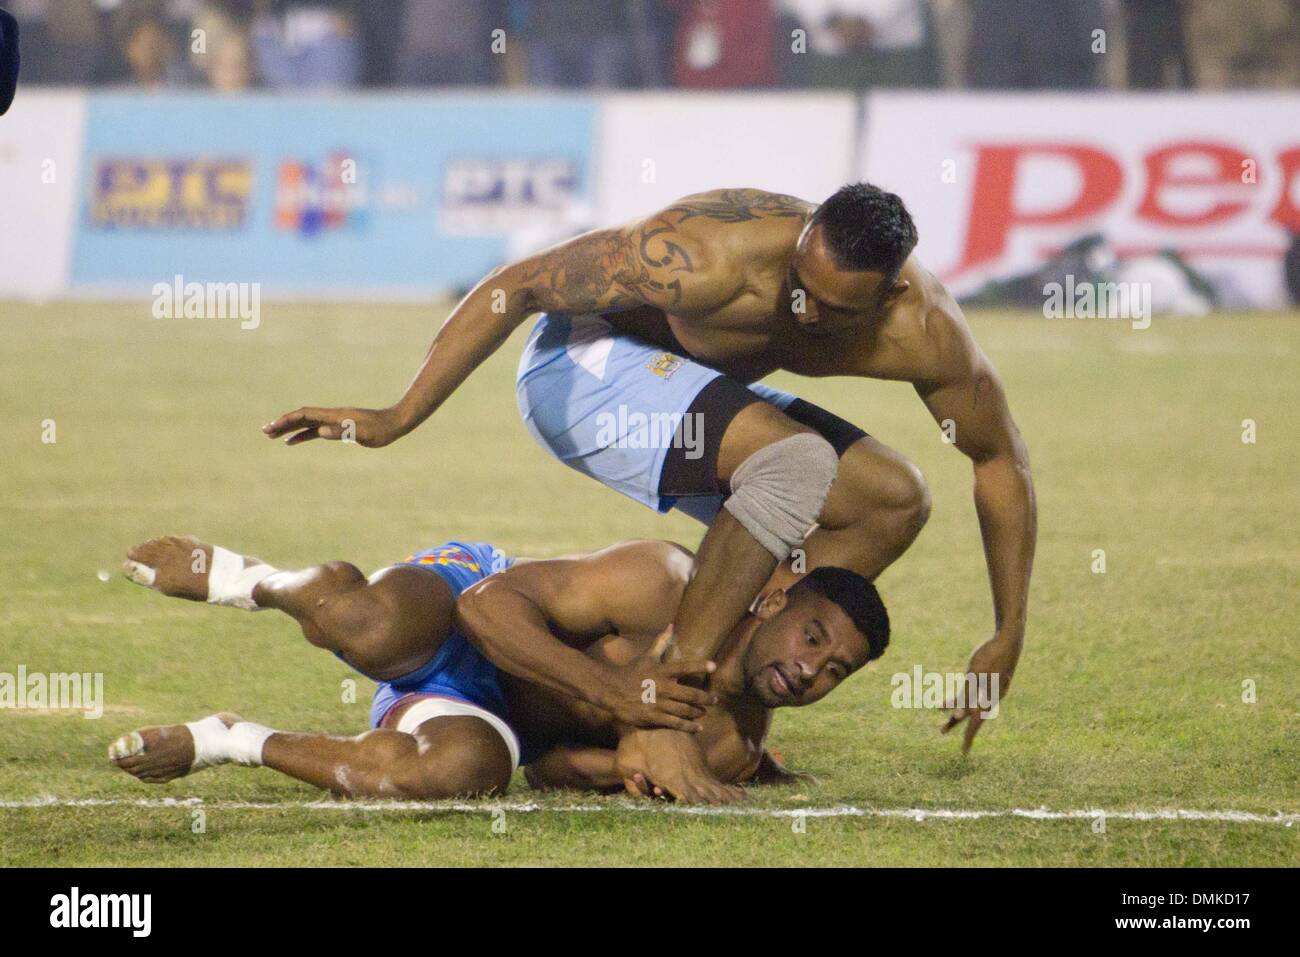 Ludhiana, Punjab of India. 15th Dec, 2013. Players from India (Top) and Pakistan compete at the men's final of the 4th Kabaddi World Cup in Ludhiana, Punjab of India, Dec. 15, 2013. Indian men's team defeated Pakistan by 48-39. Credit:  Javed Dar/Xinhua/Alamy Live News Stock Photo